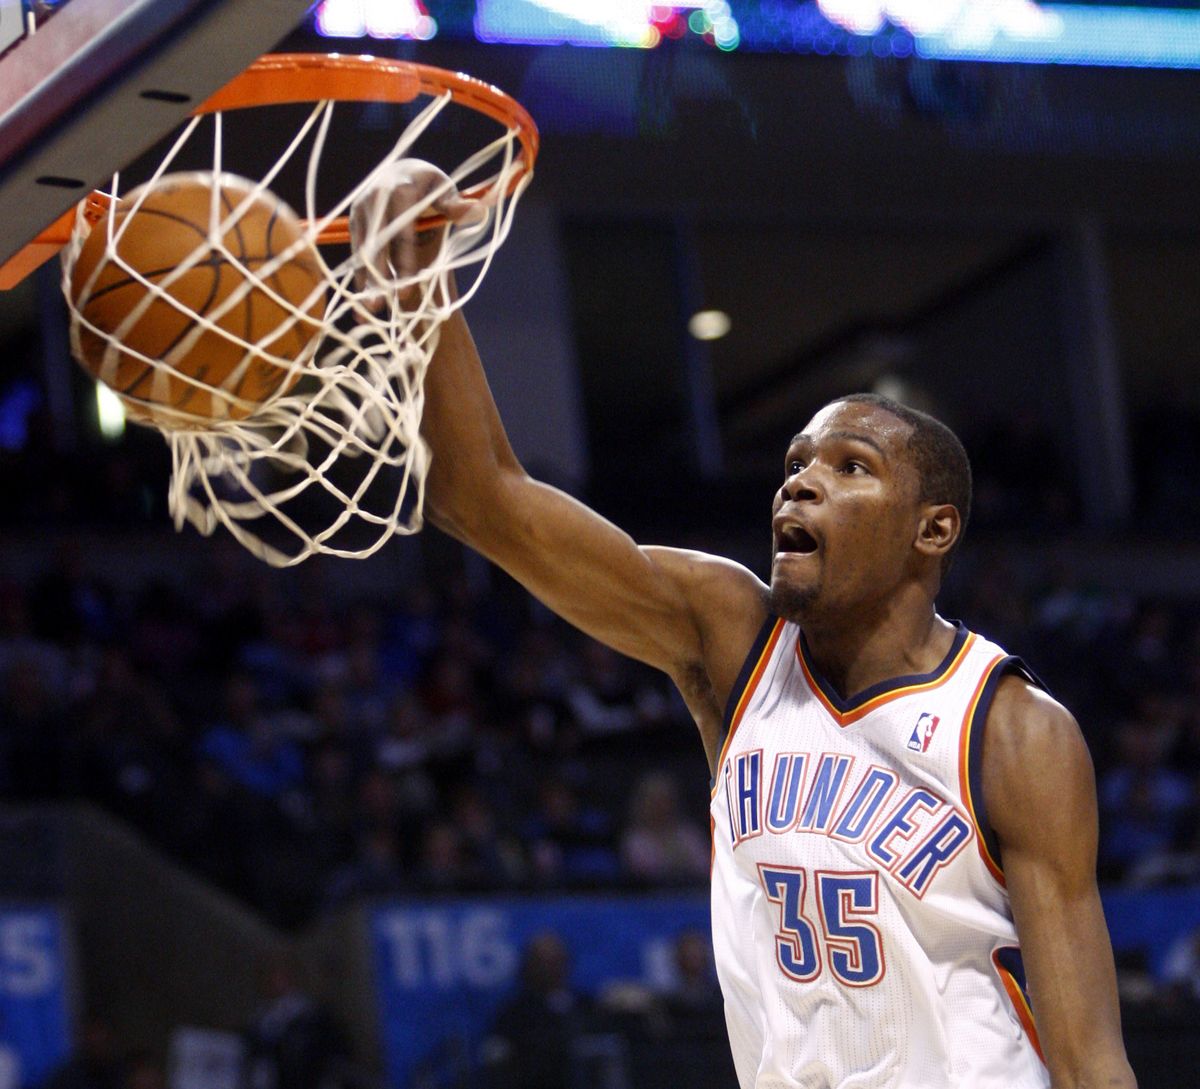 Oklahoma City Thunder forward Kevin Durant became the NBA’s youngest scoring champion. (Associated Press)